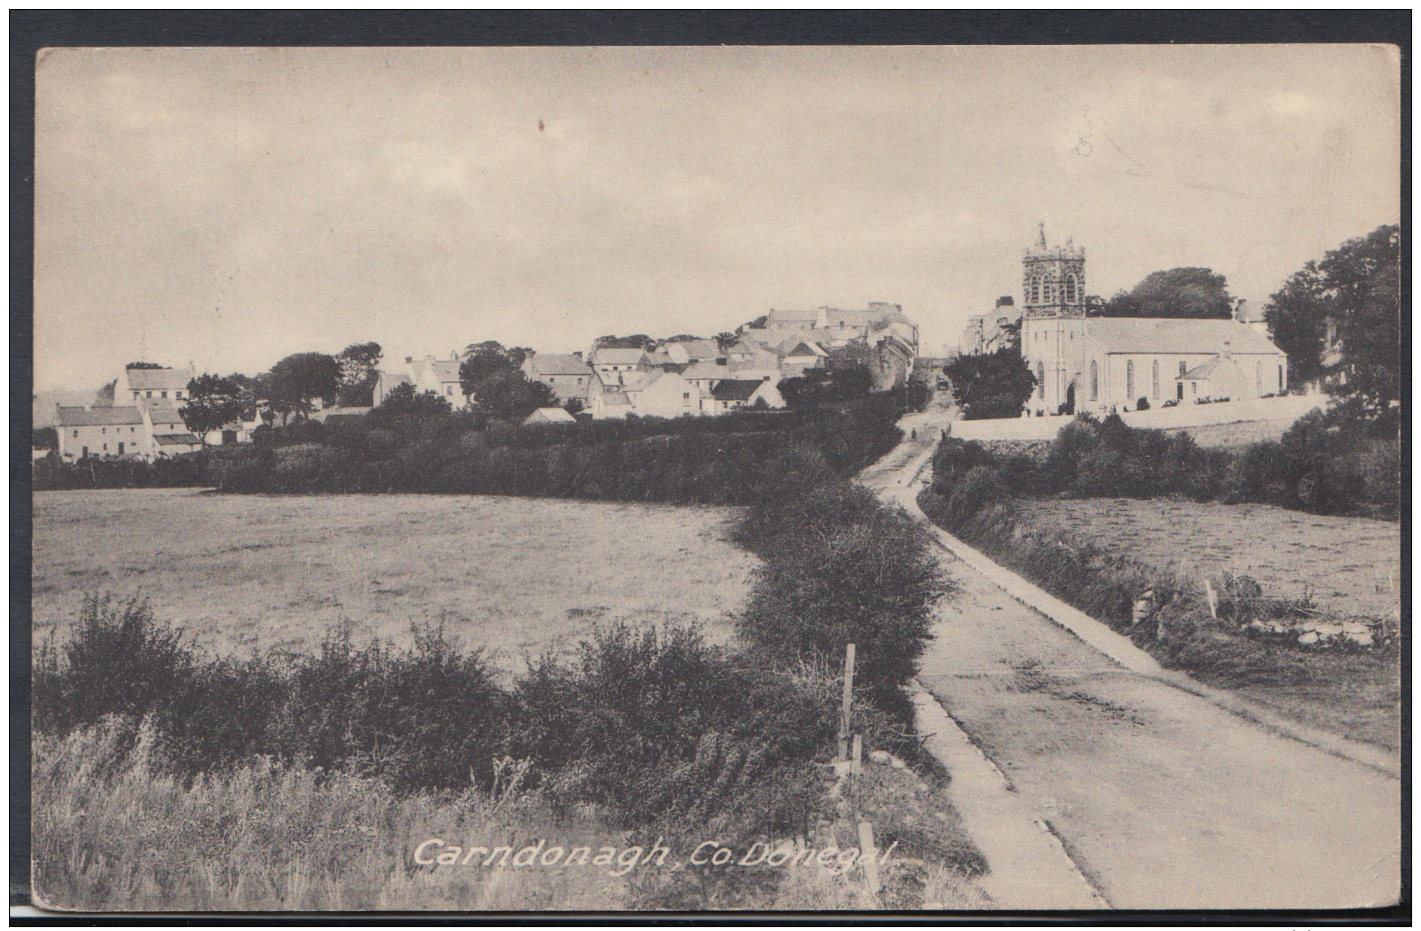 Ireland Postcard - Carndonagh, Co Donegal   DC1863 - Donegal